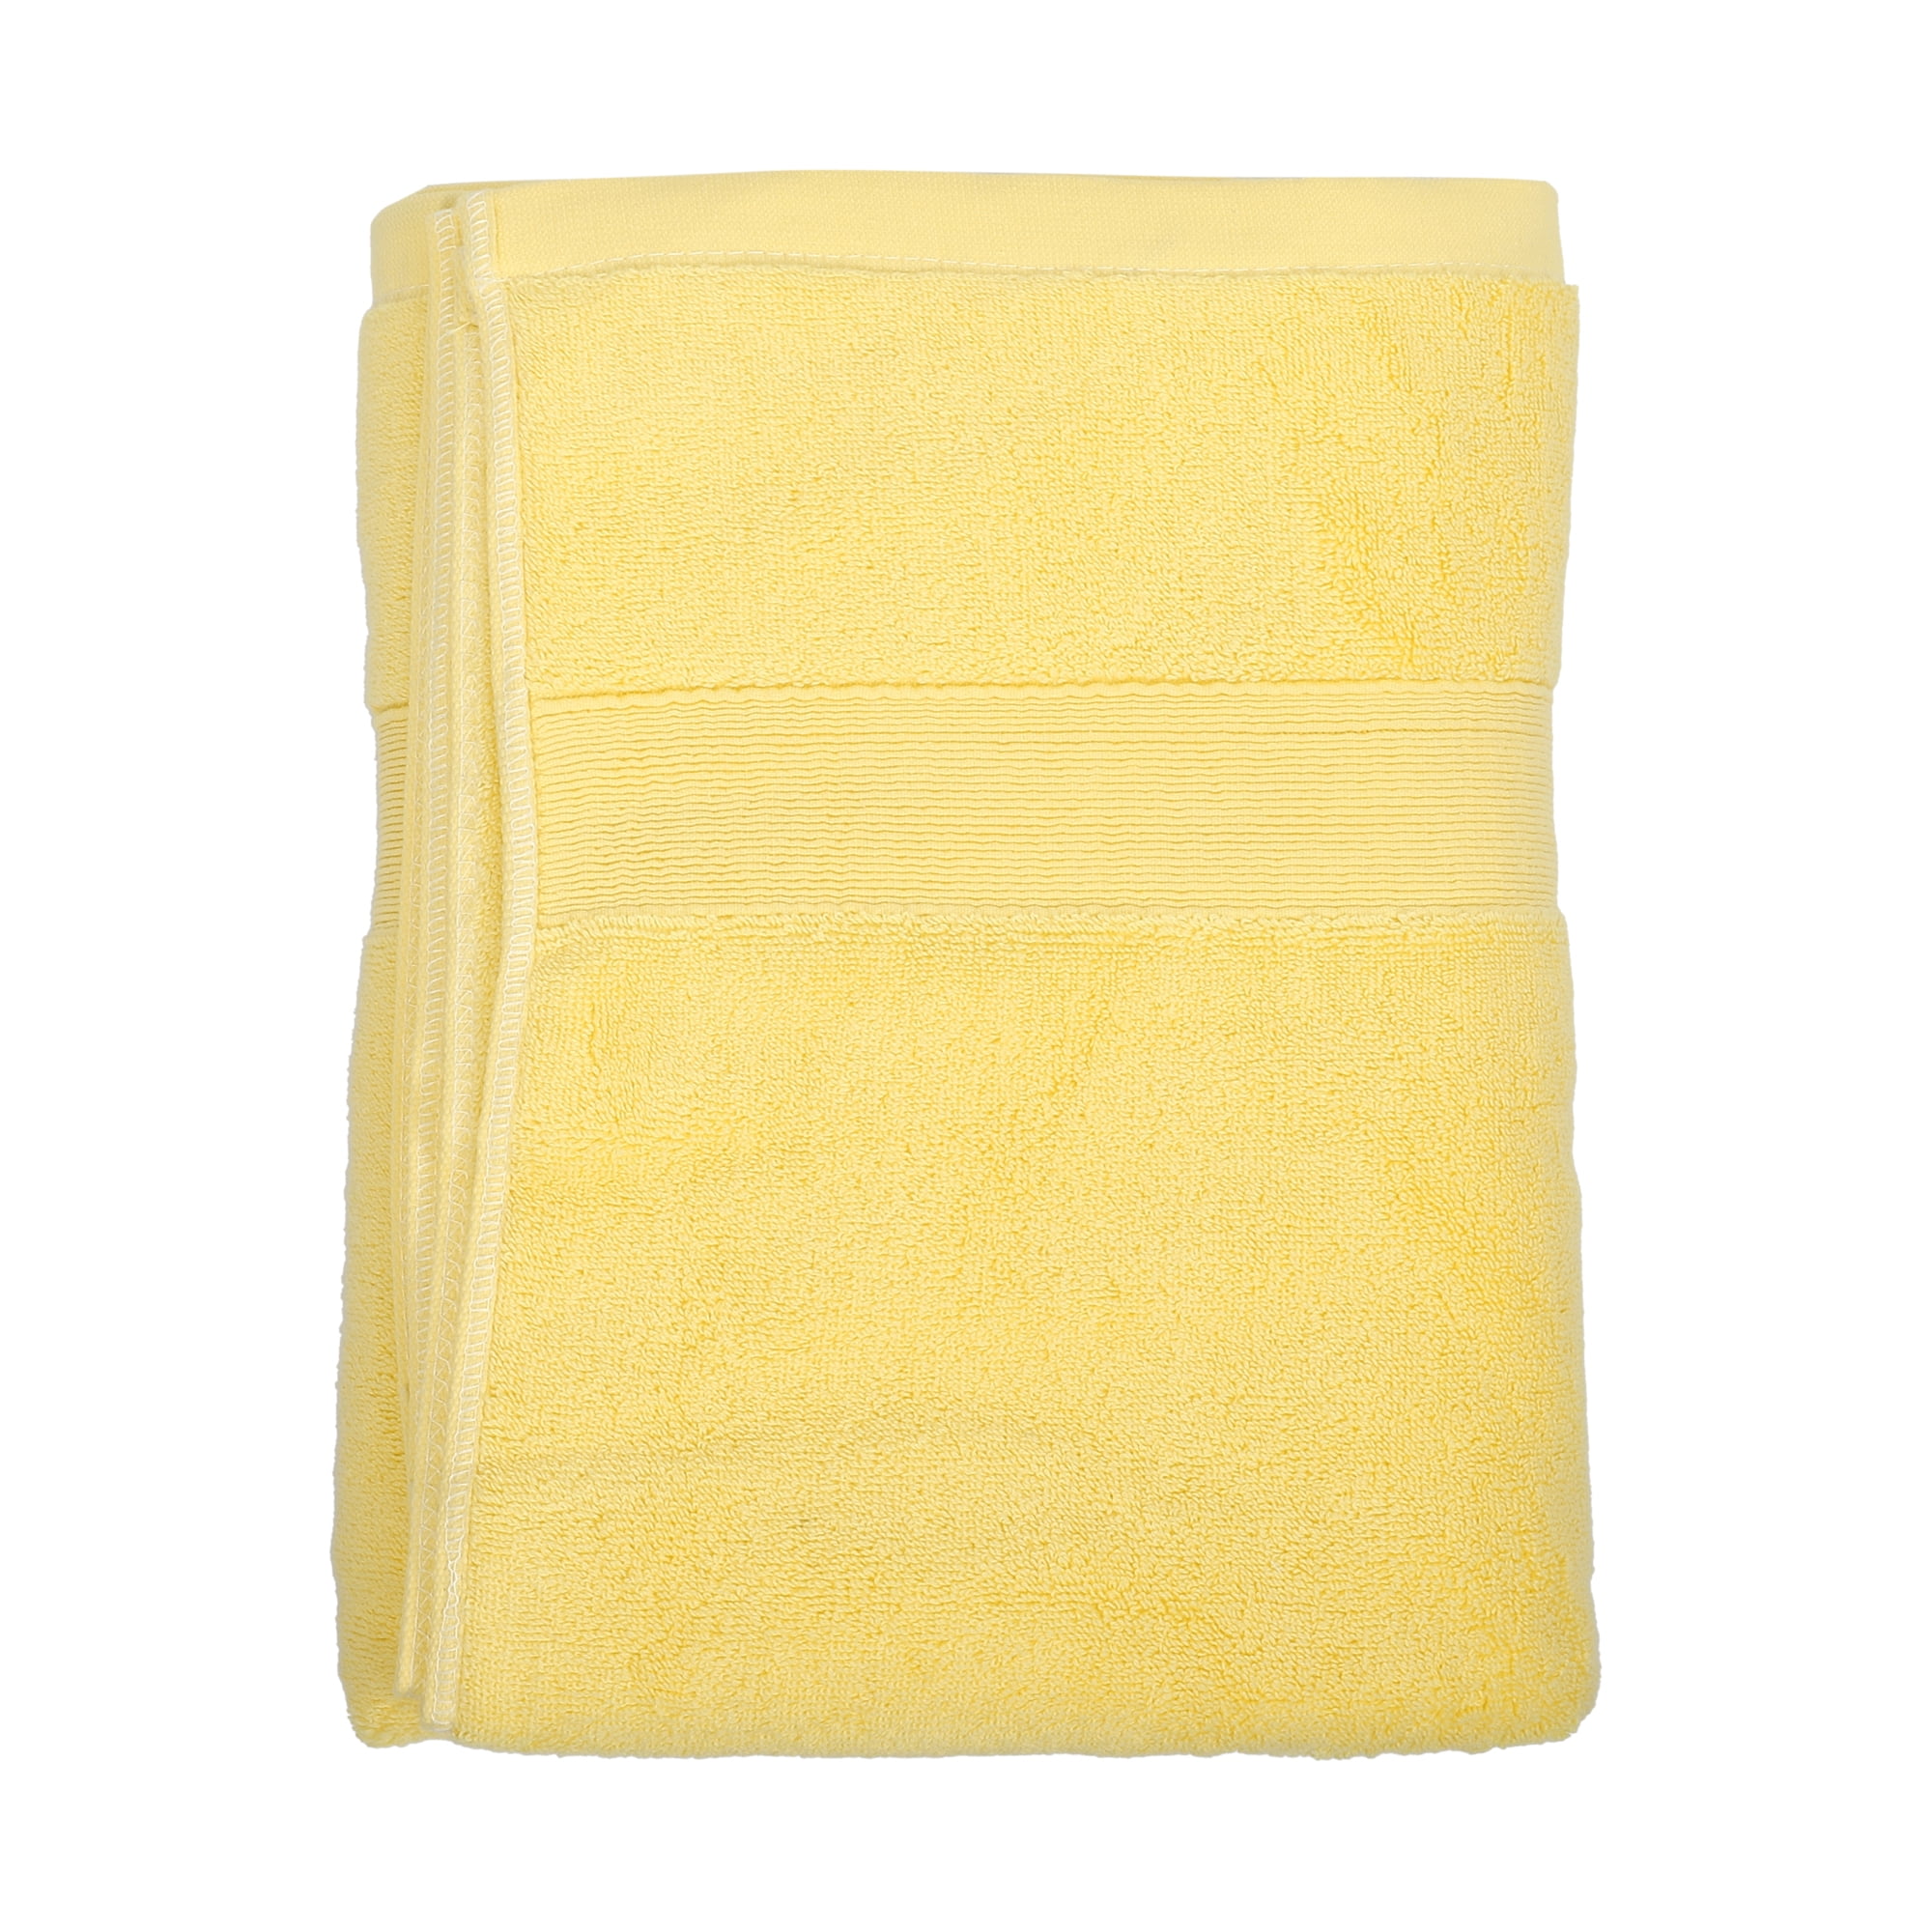 1pc Yellow Jacquard Letter Bath Towel Soft Absorbent Unisex Thick